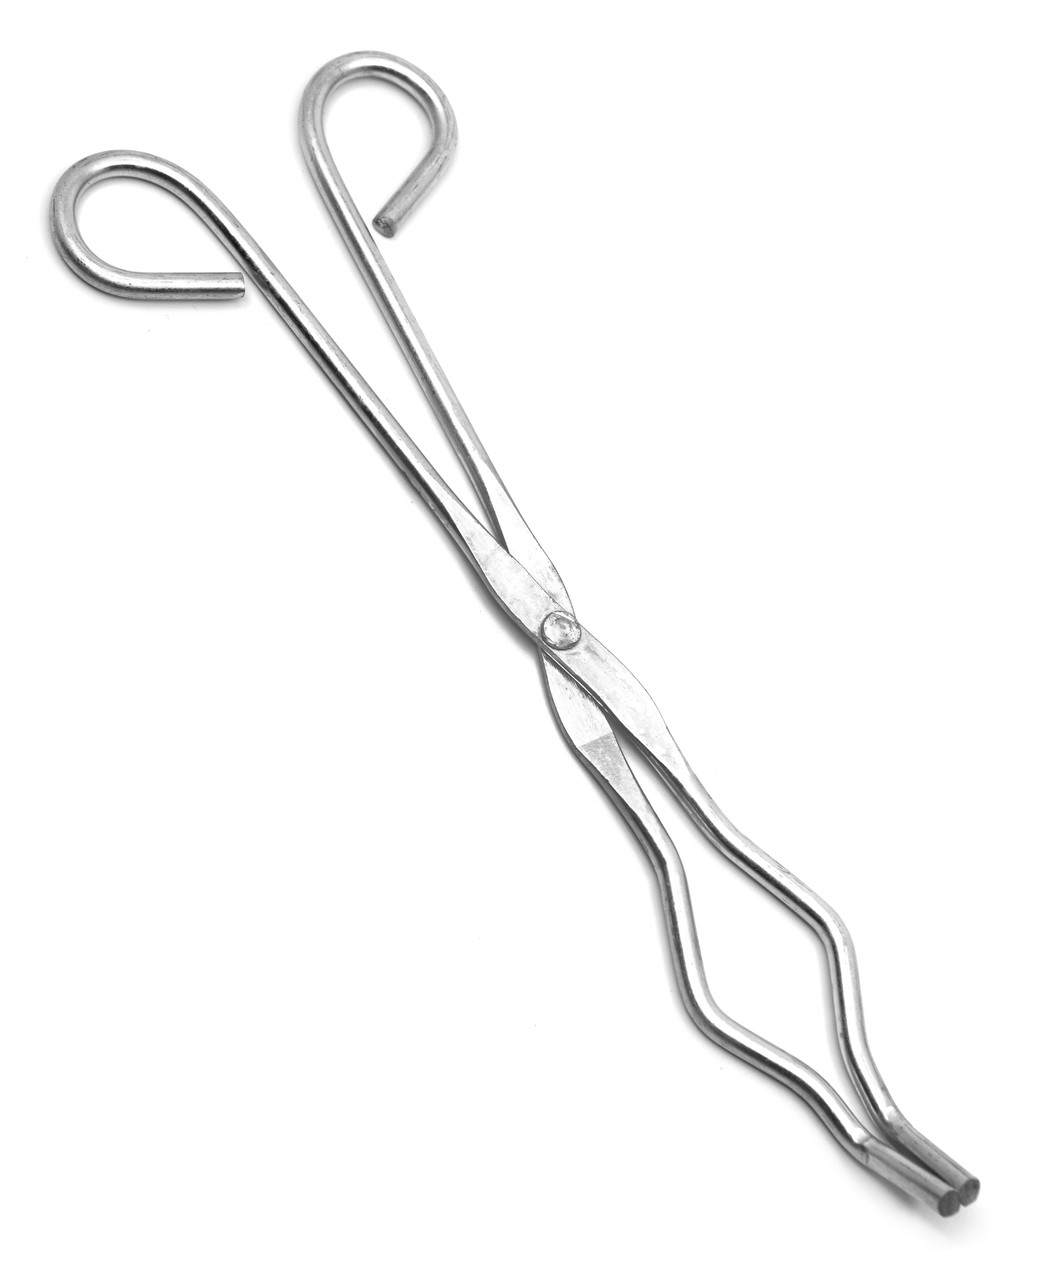 Crucible Tongs with Bow- Straight, Serrated Tips, Metal, 9.5 long